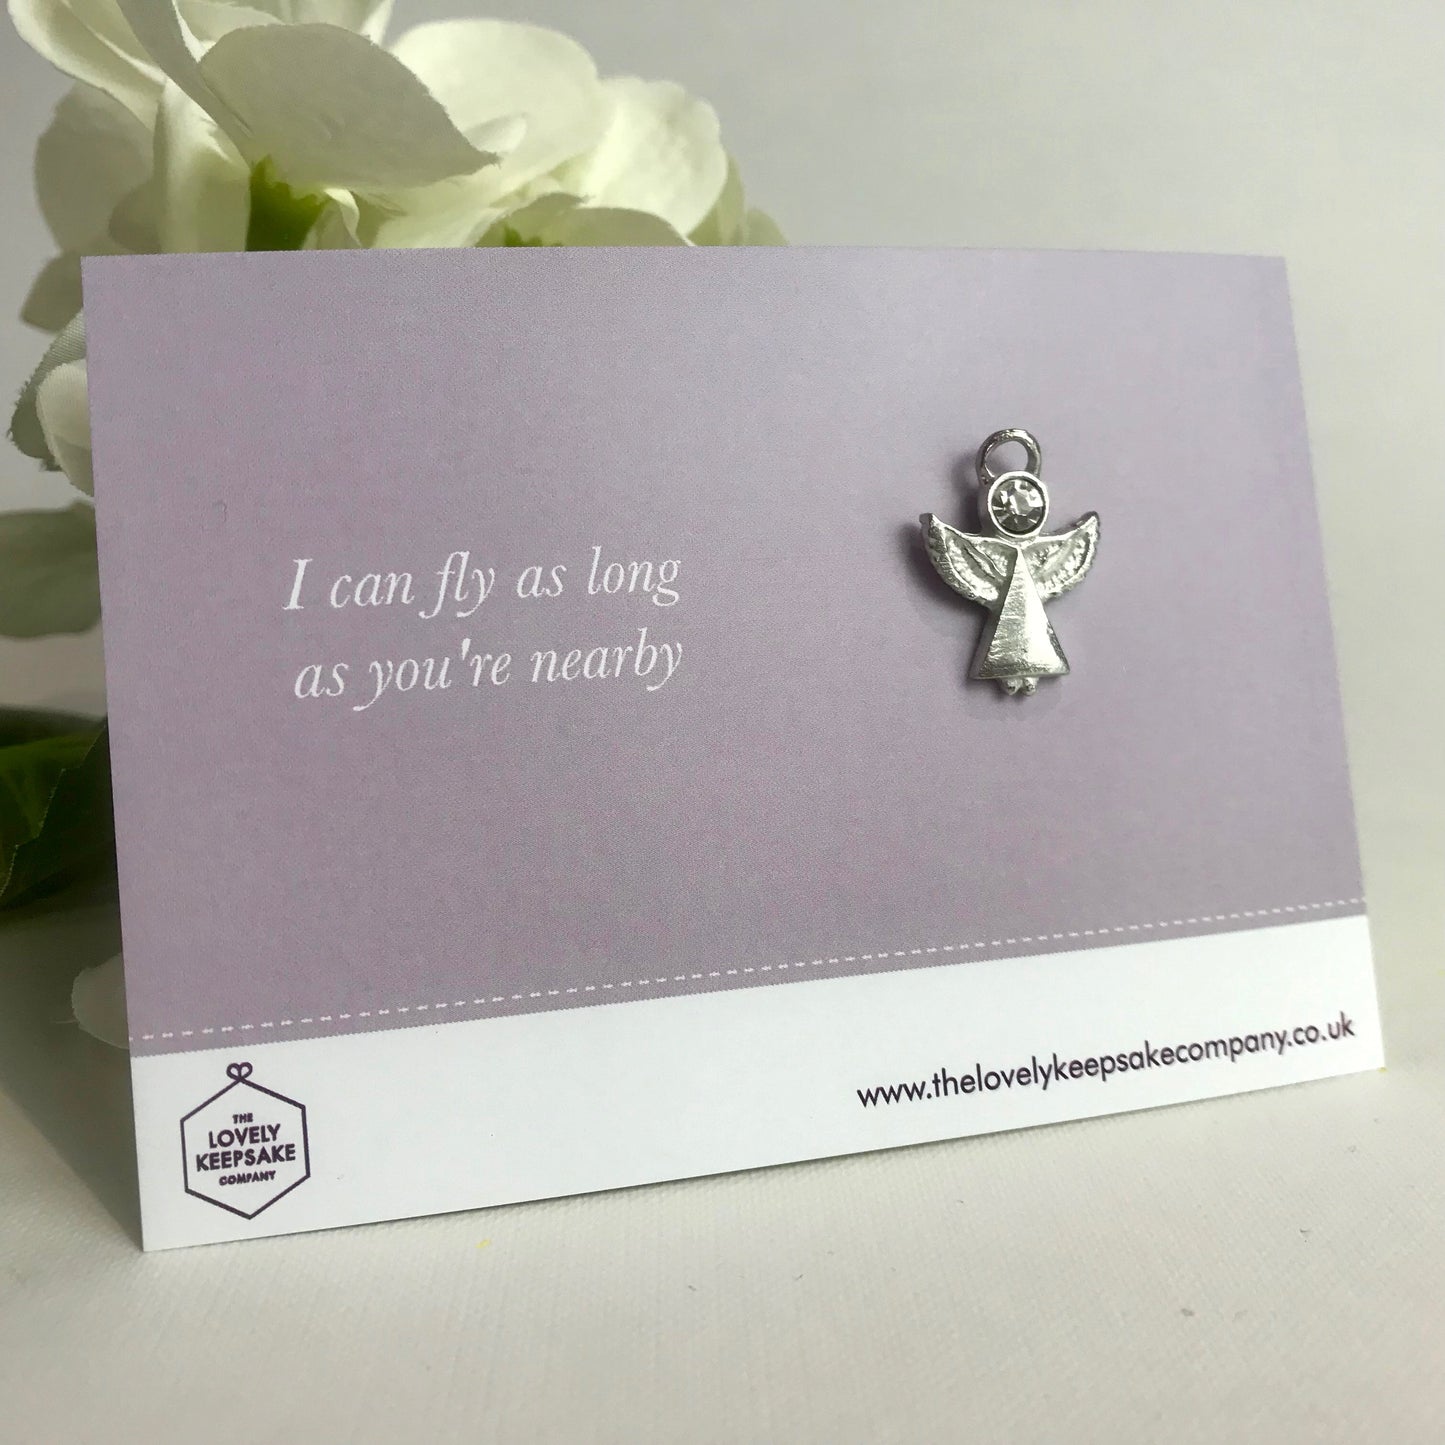 'I can fly as long as you're nearby' Angel Pin